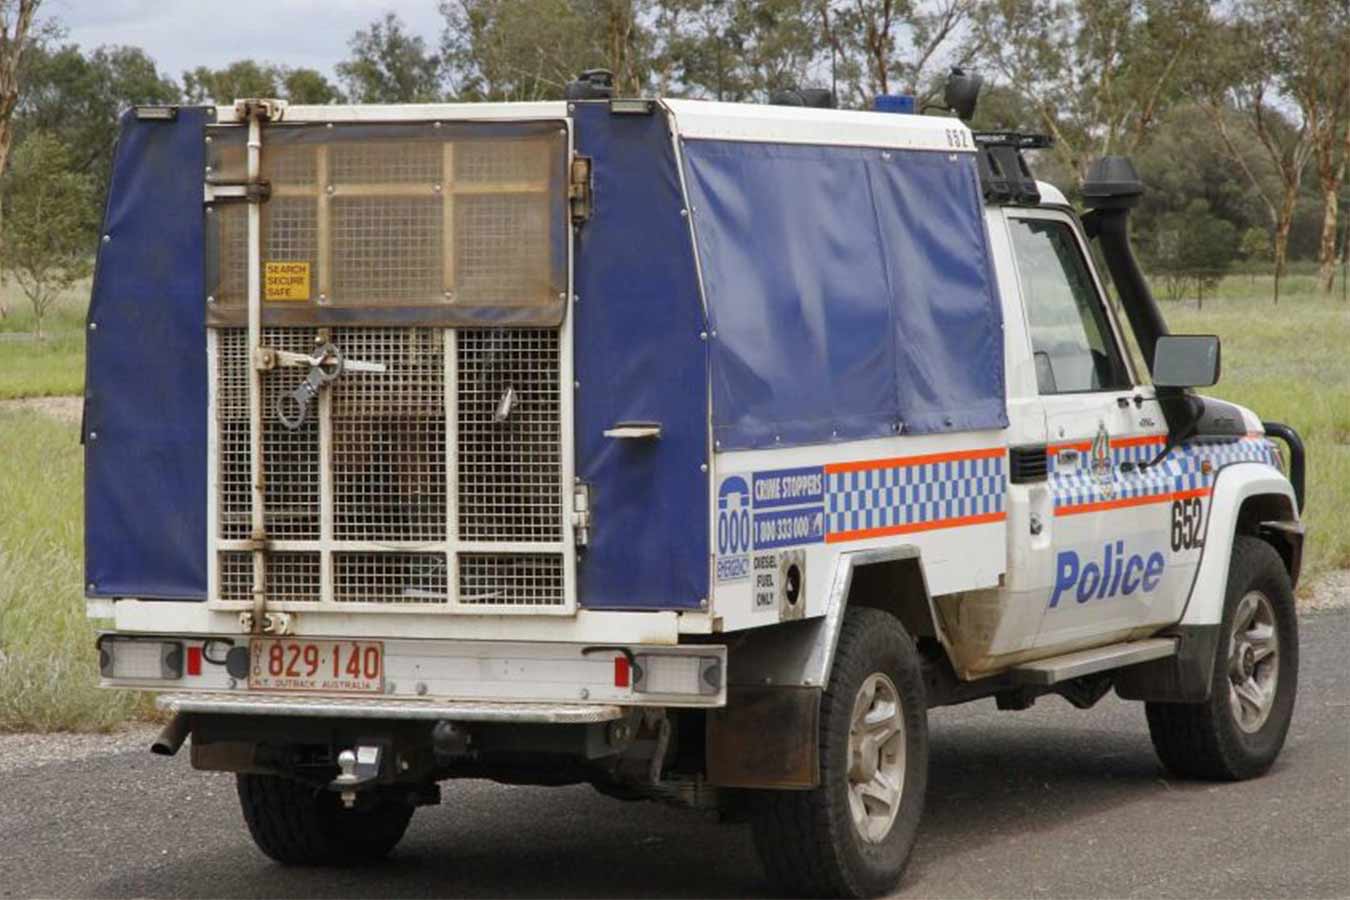 Call for the NT to ban 'police cages' - Amnesty International Australia